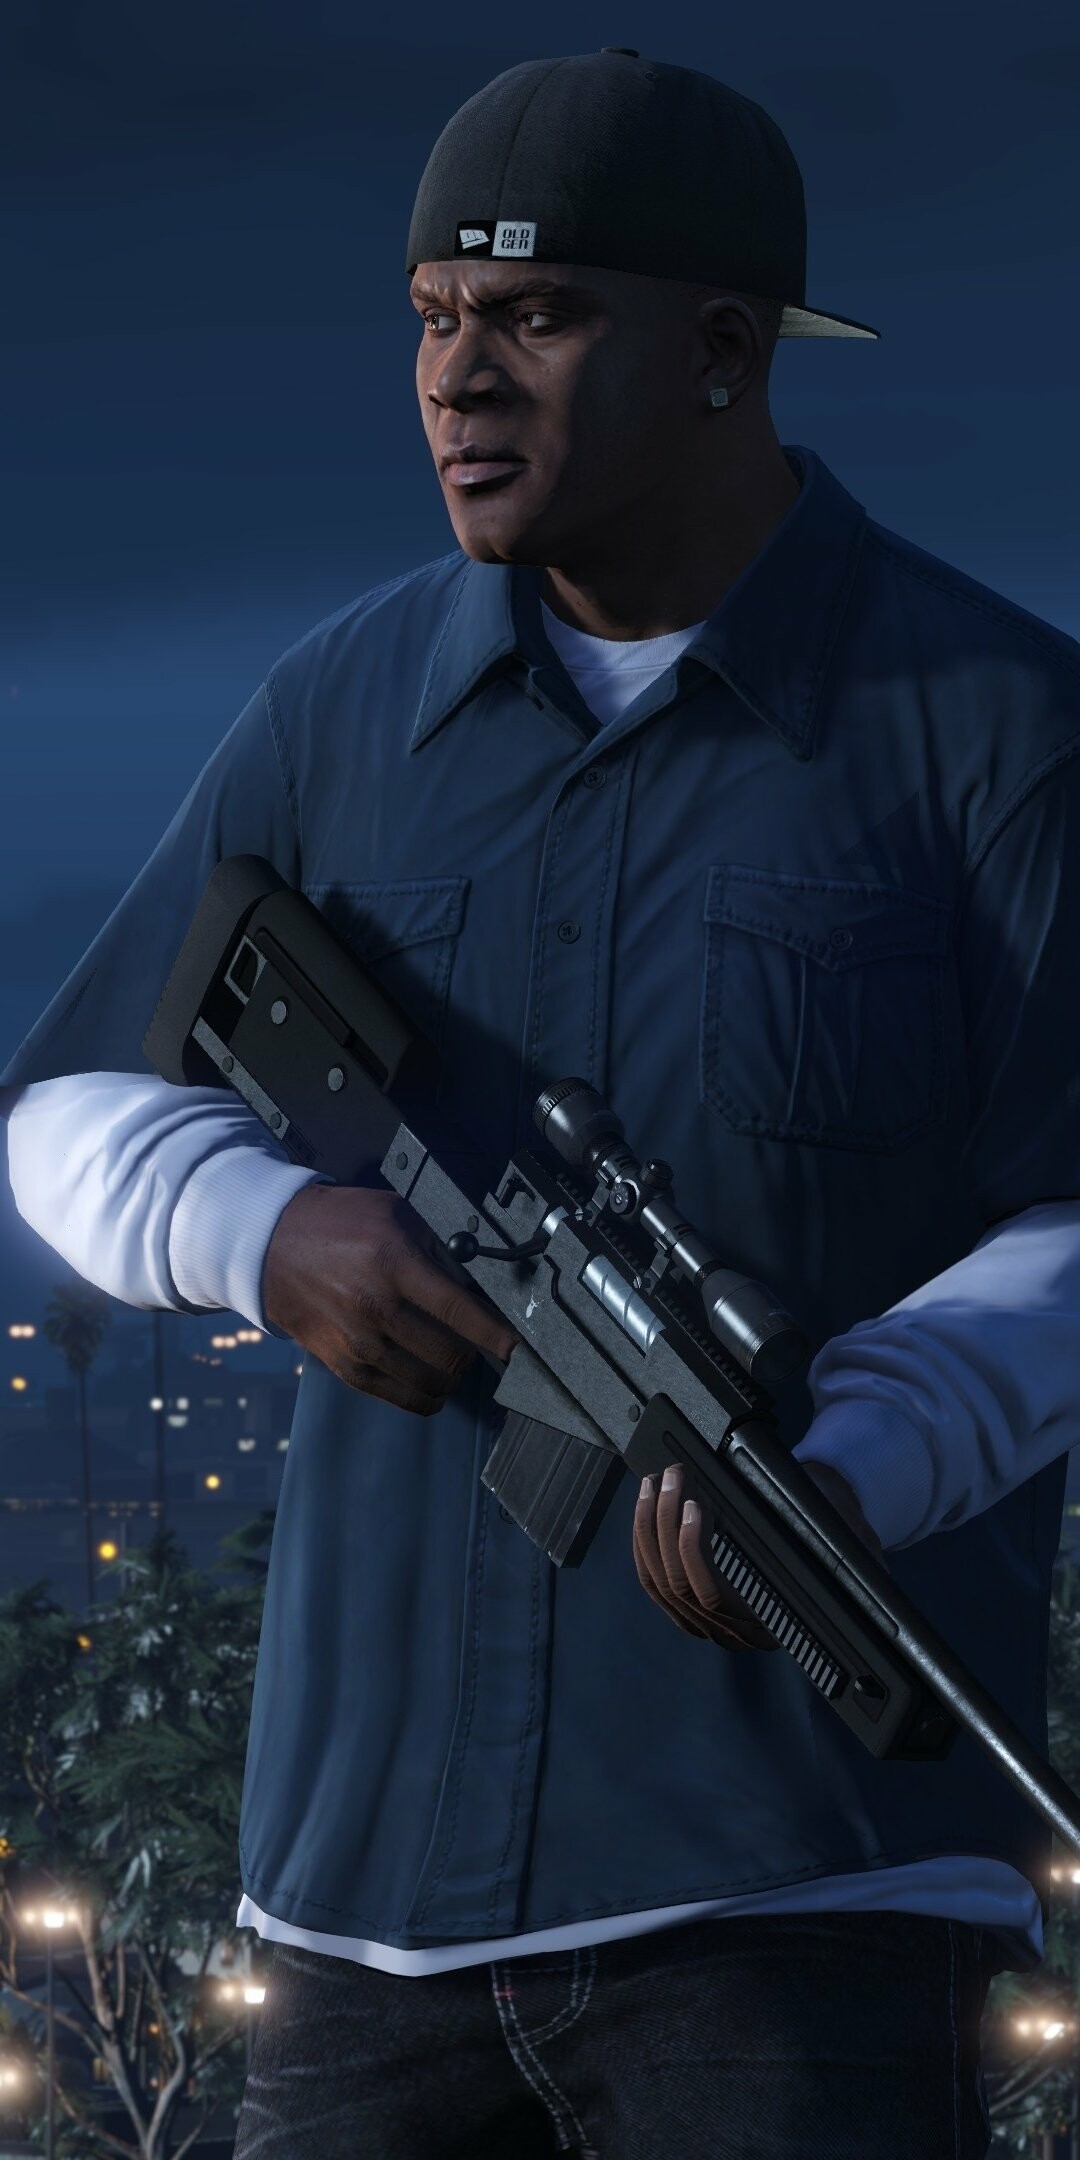 Grand Theft Auto 5: Franklin Clinton, One of the three playable characters in GTA V alongside Michael De Santa and Trevor Philips. 1080x2160 HD Background.